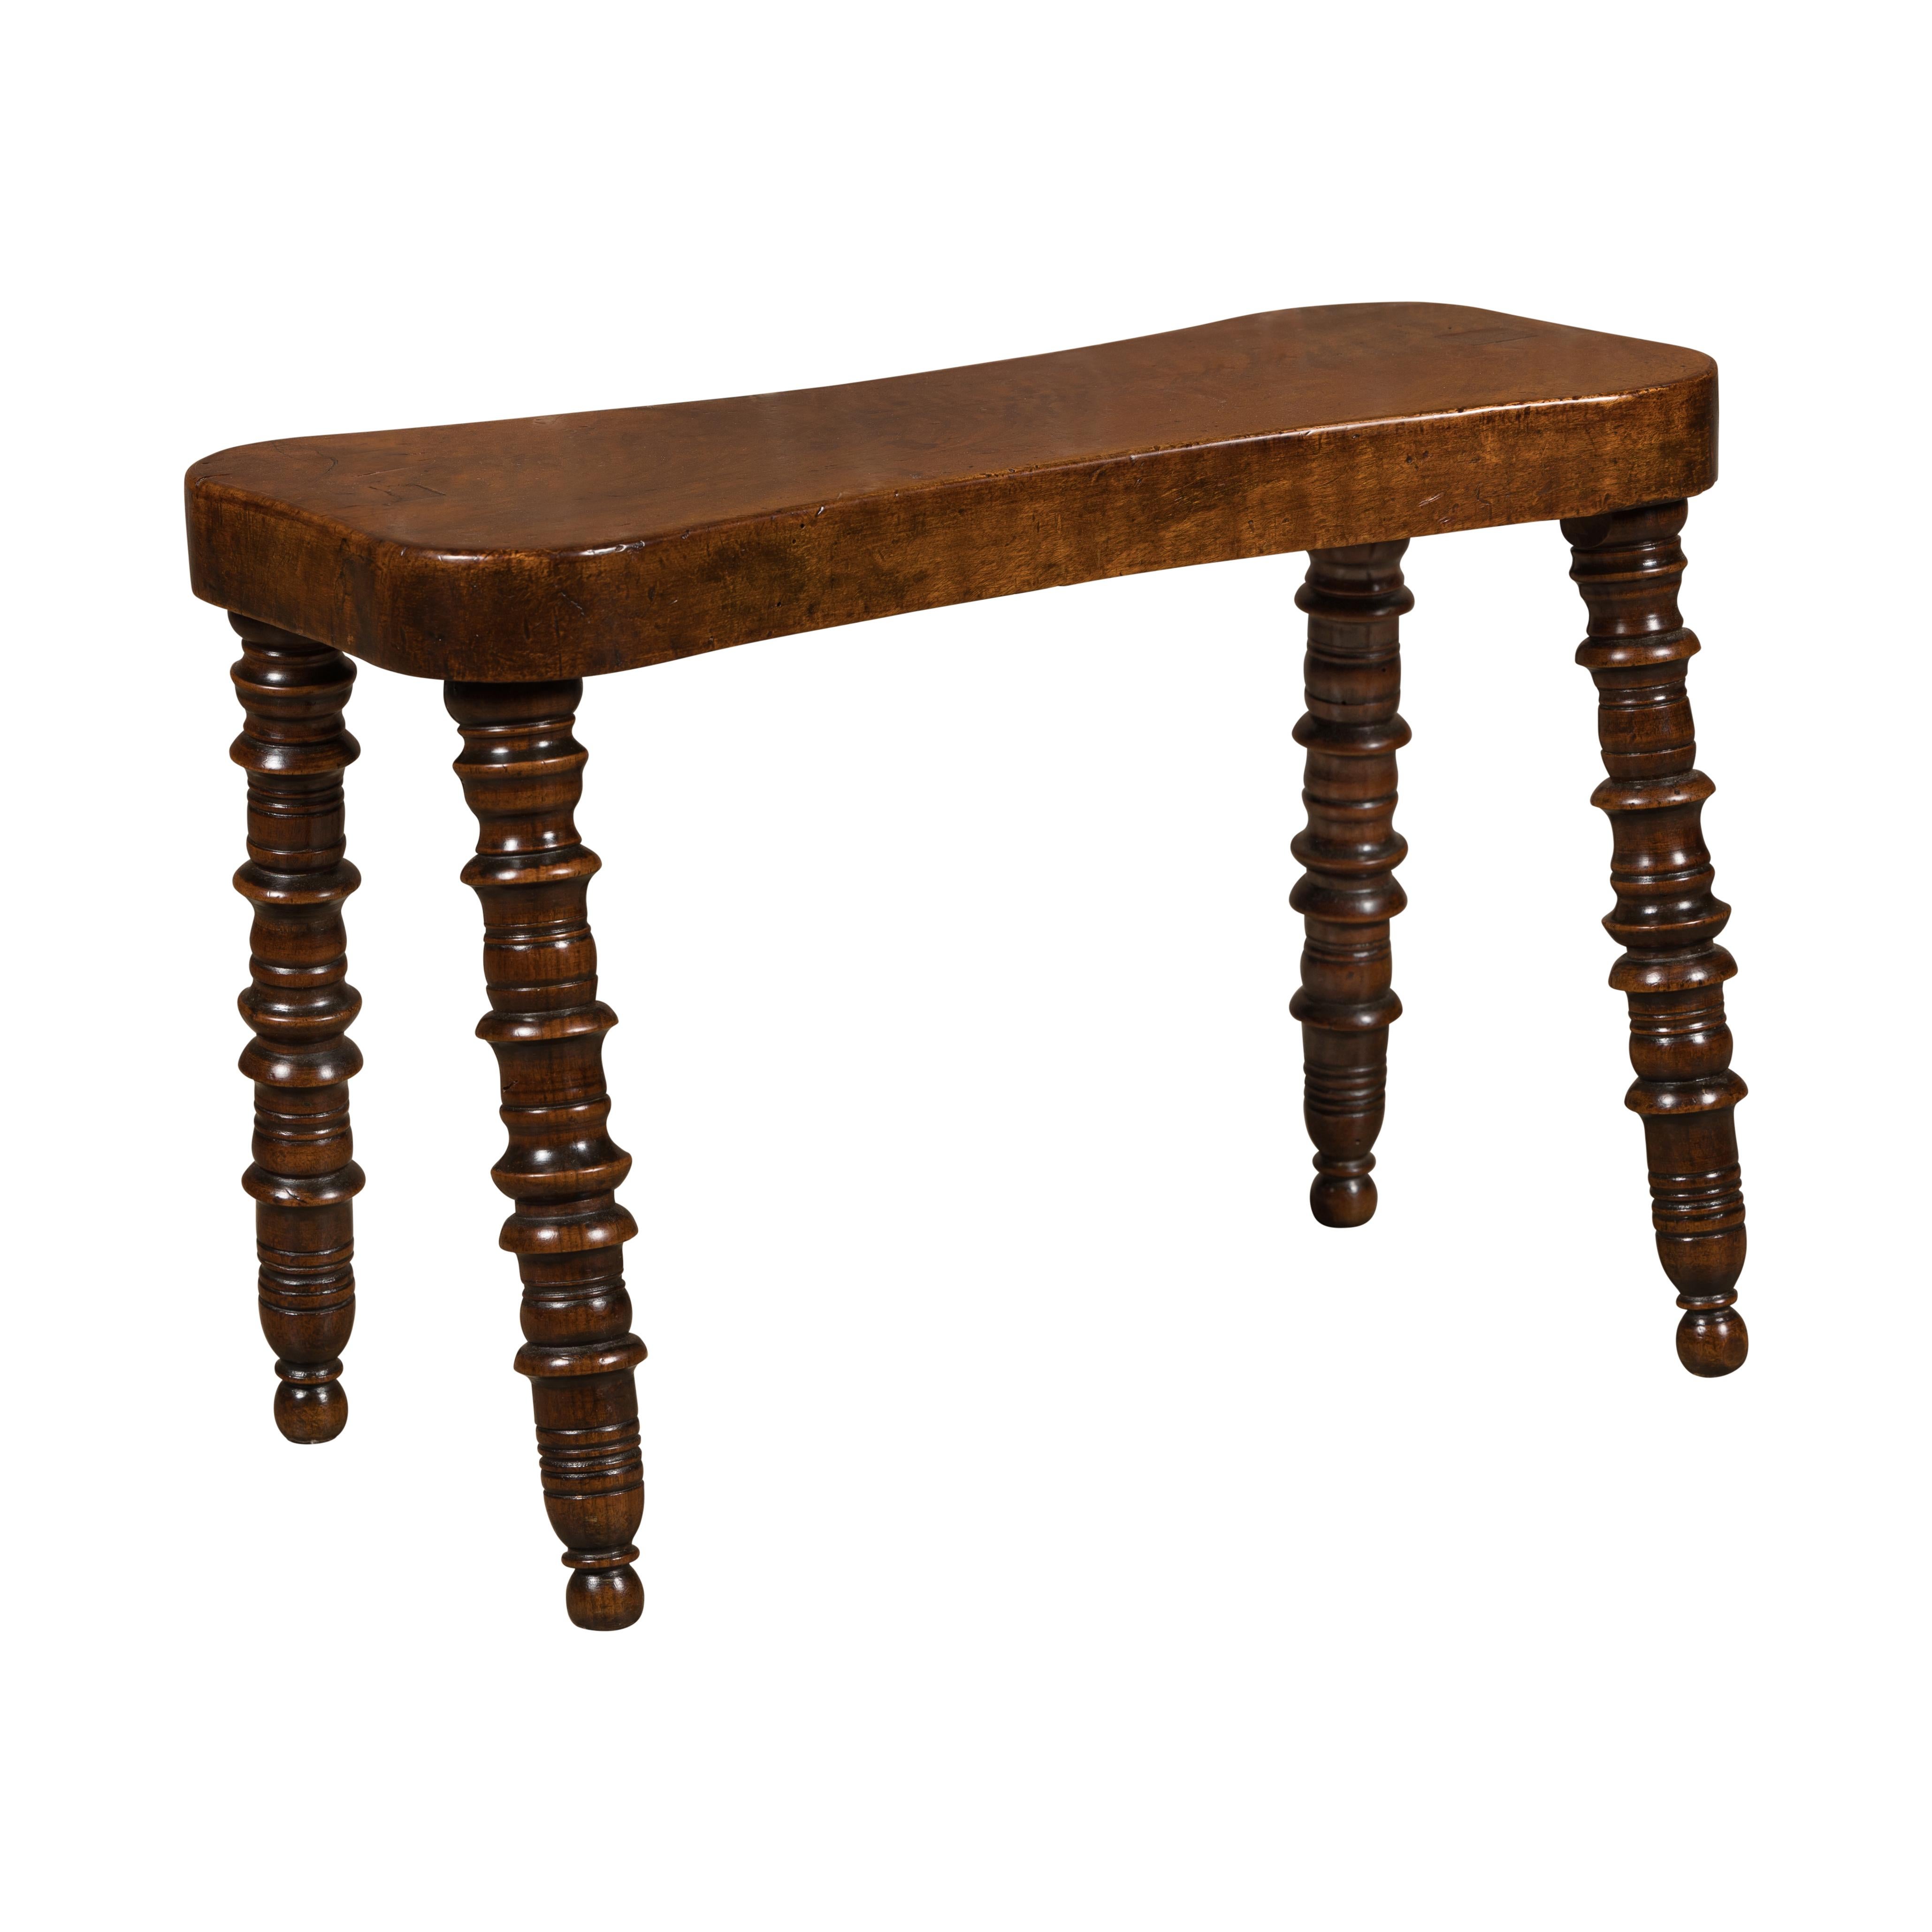 English 19th Century Walnut Stool with Turned Legs and Ball Feet For Sale 8